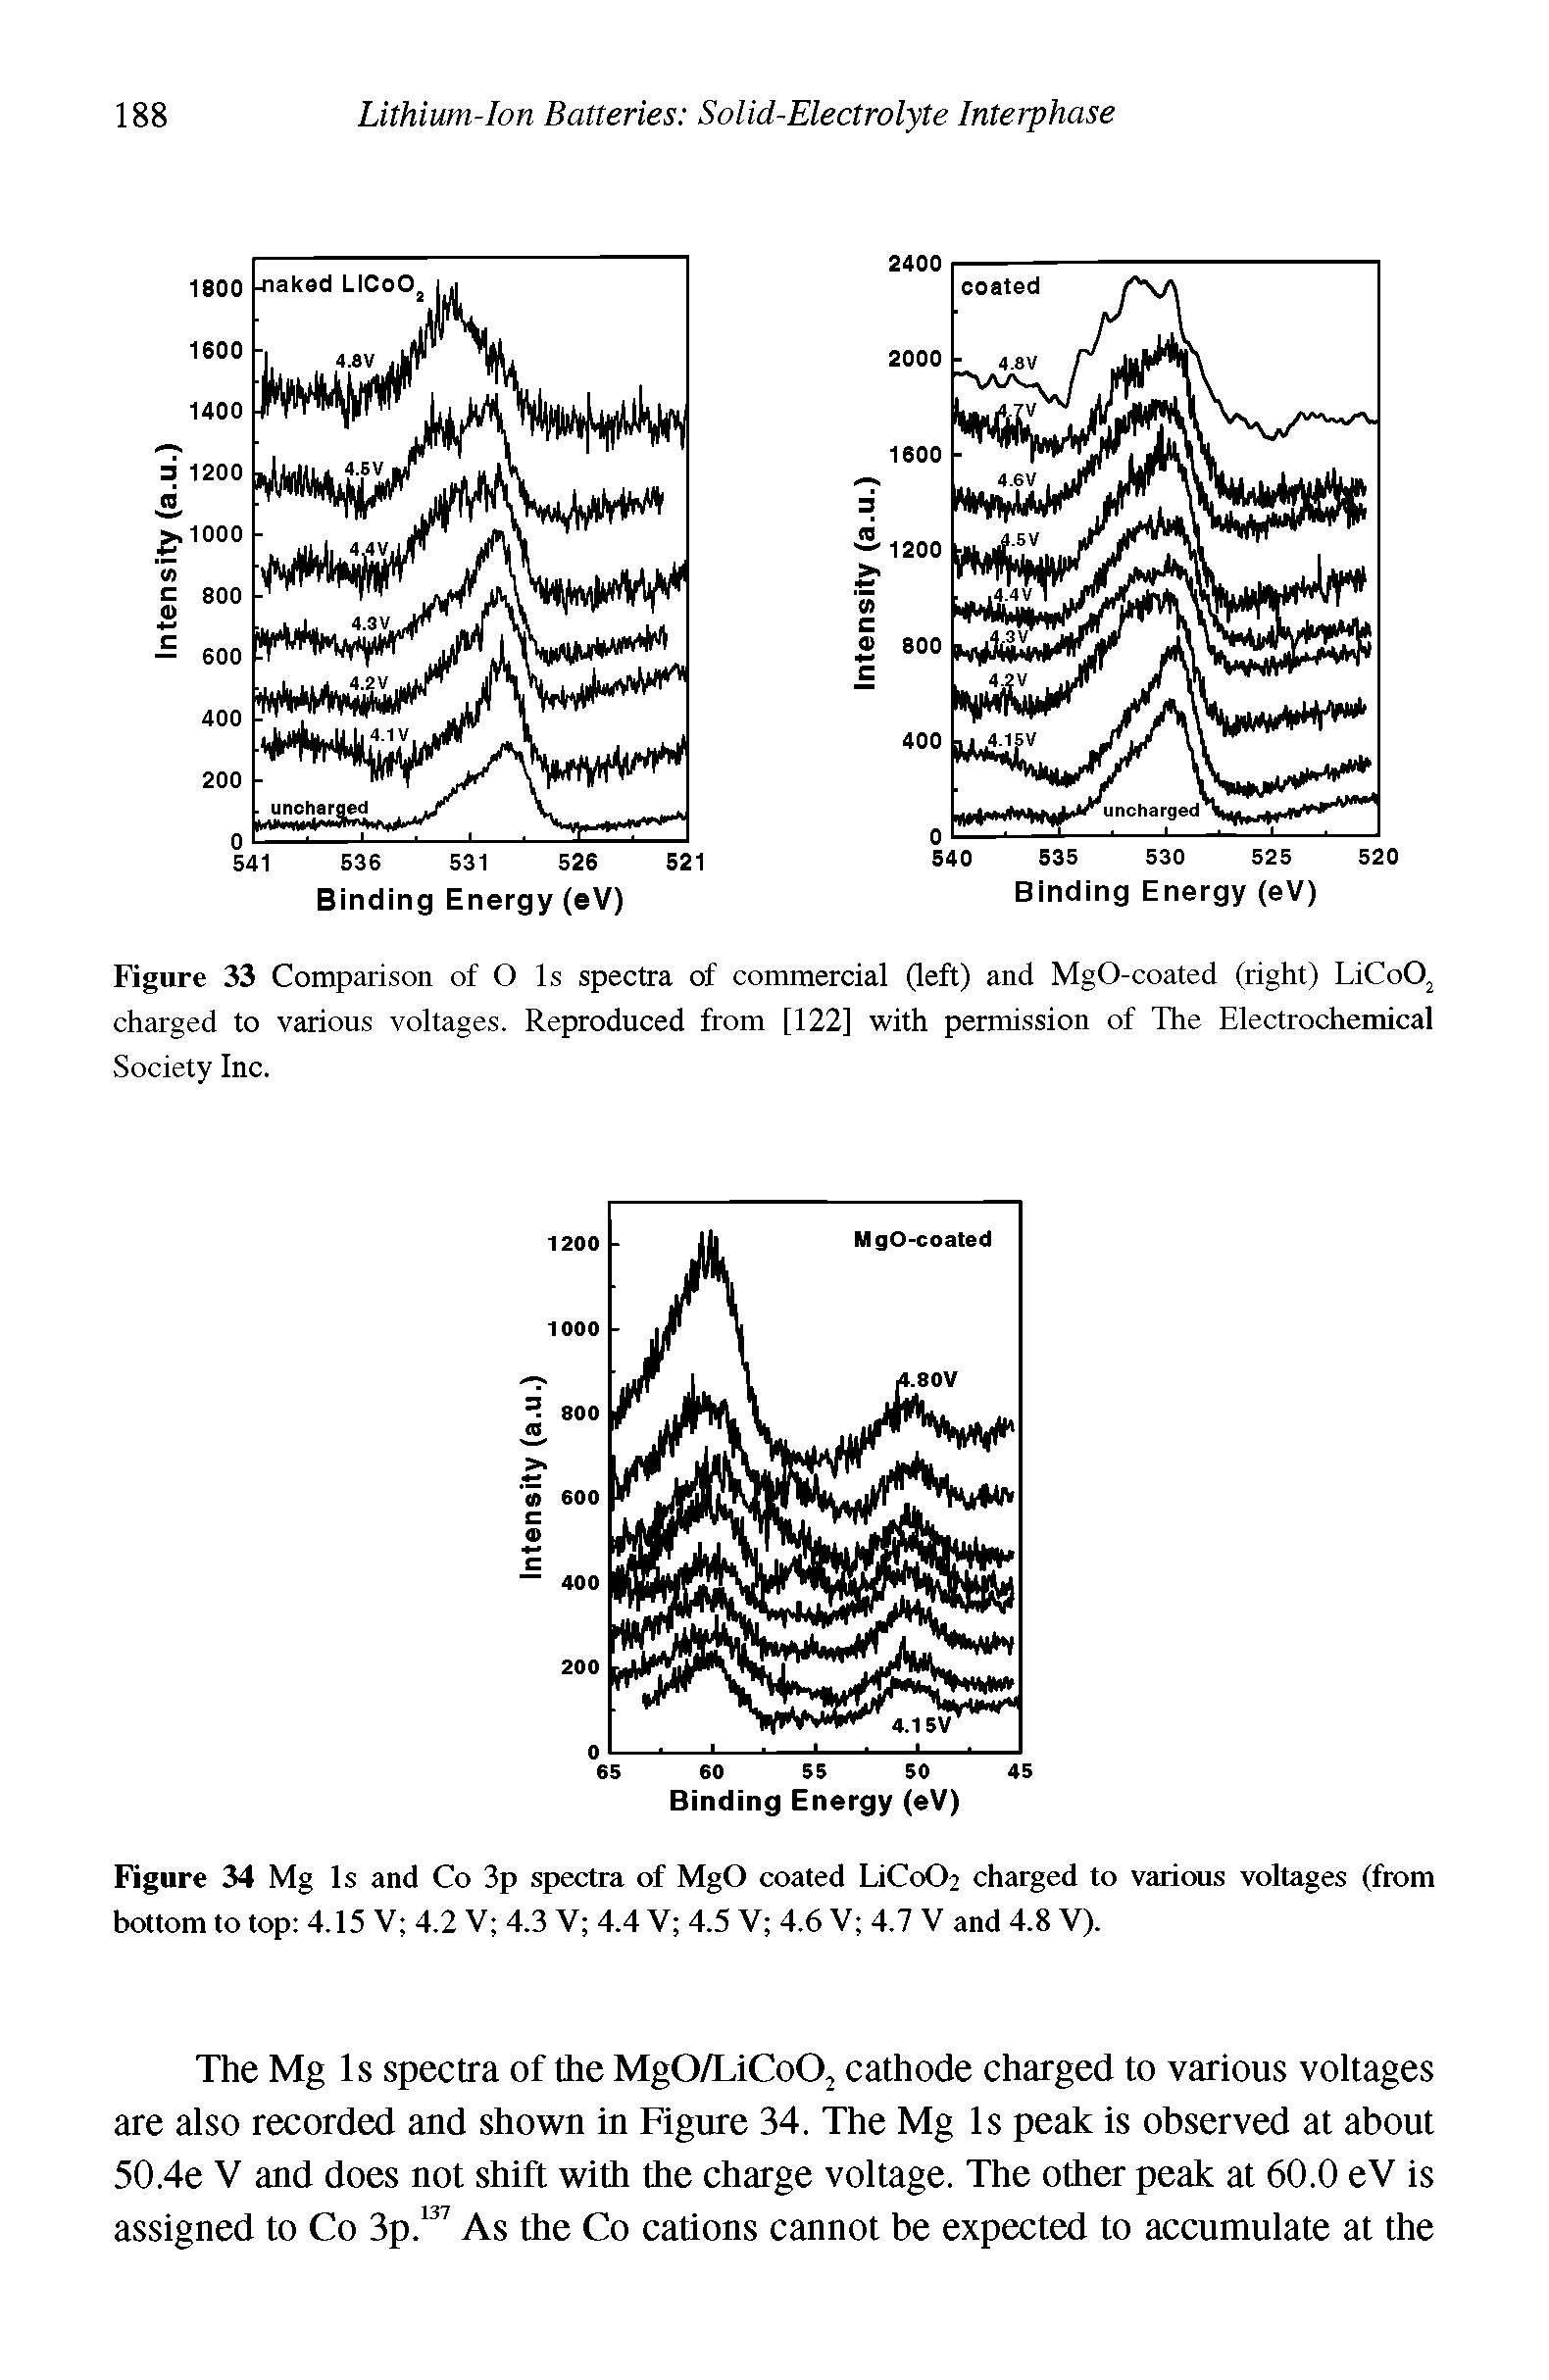 Figure 33 Comparison of O Is spectra of commercial (left) and MgO-coated (right) LiCoO charged to various voltages. Reproduced from [122] with permission of The Electrochemical Society Inc.